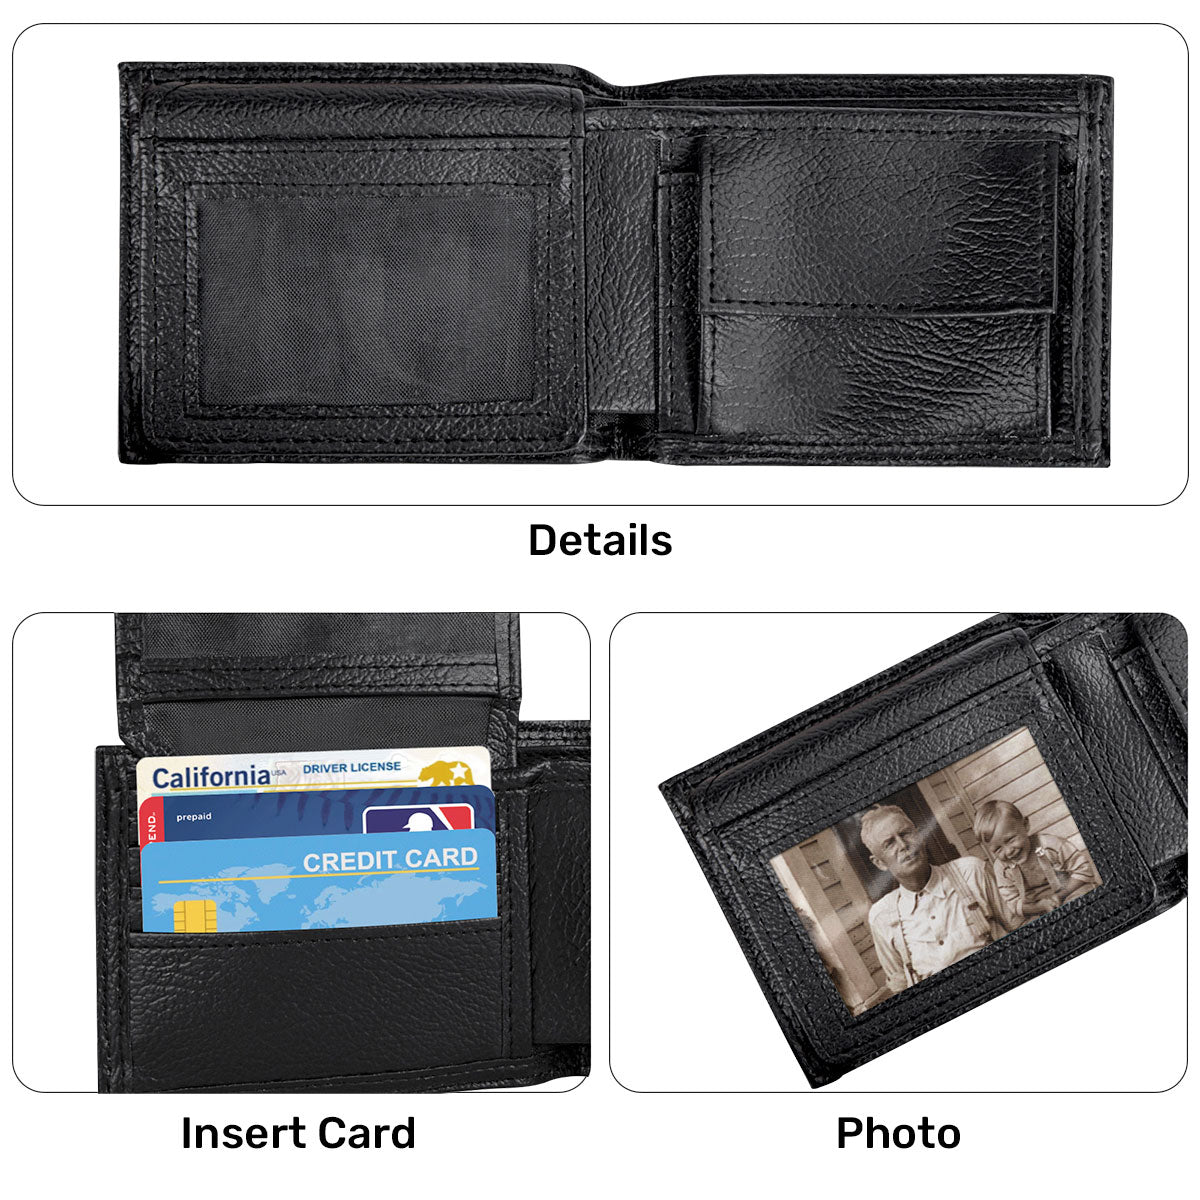 Side By Side Or Miles Apart - Personalized Leather Folded Wallet SBLFWM1033